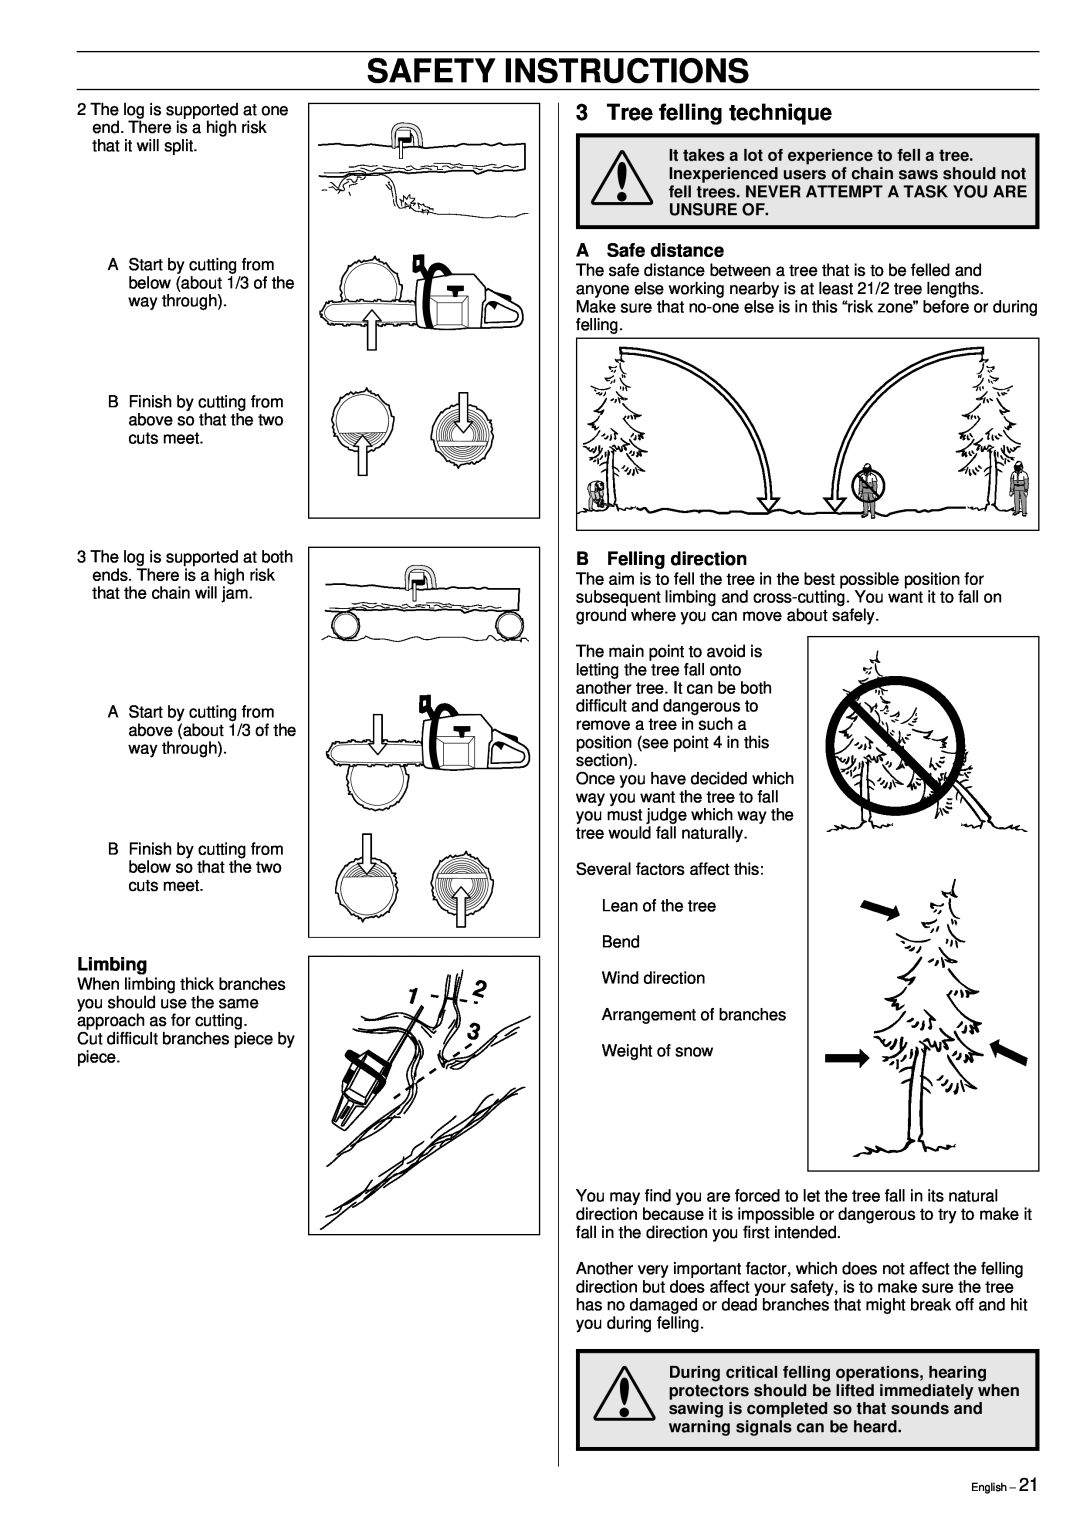 Husqvarna 61, 268, 272XP manual Tree felling technique, Safety Instructions, A Safe distance, Limbing, B Felling direction 